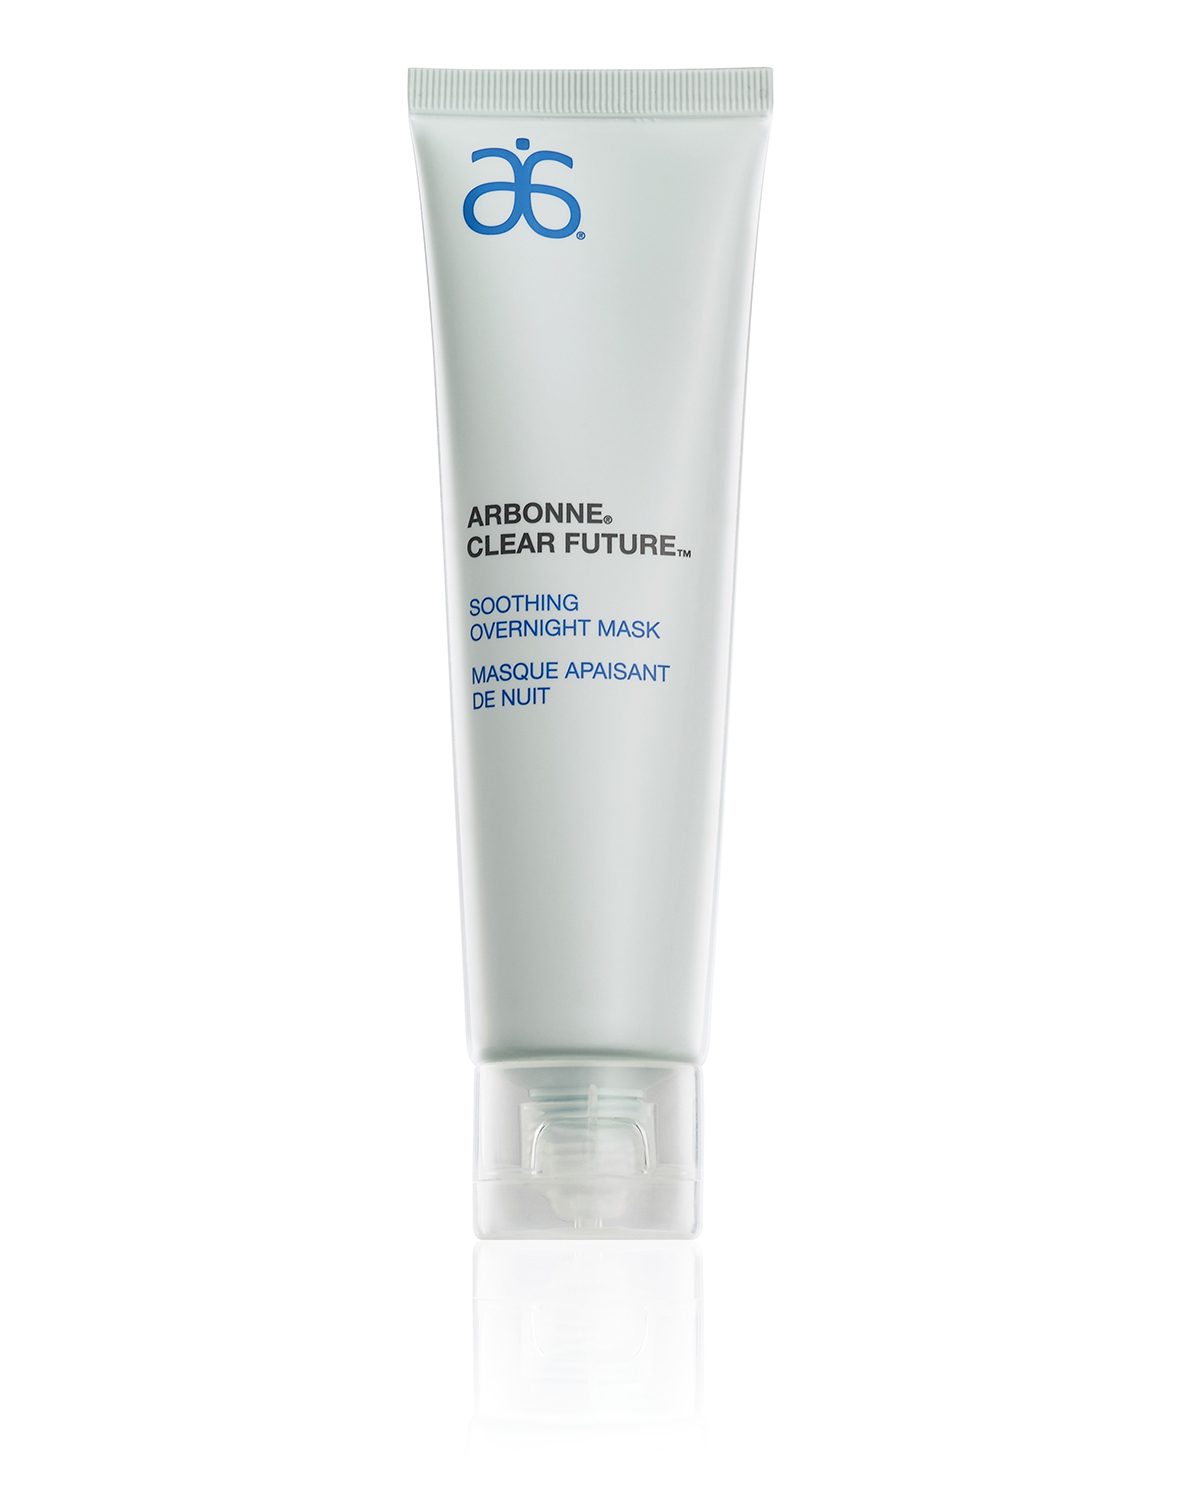 Arbonne, Soothing overnight mask